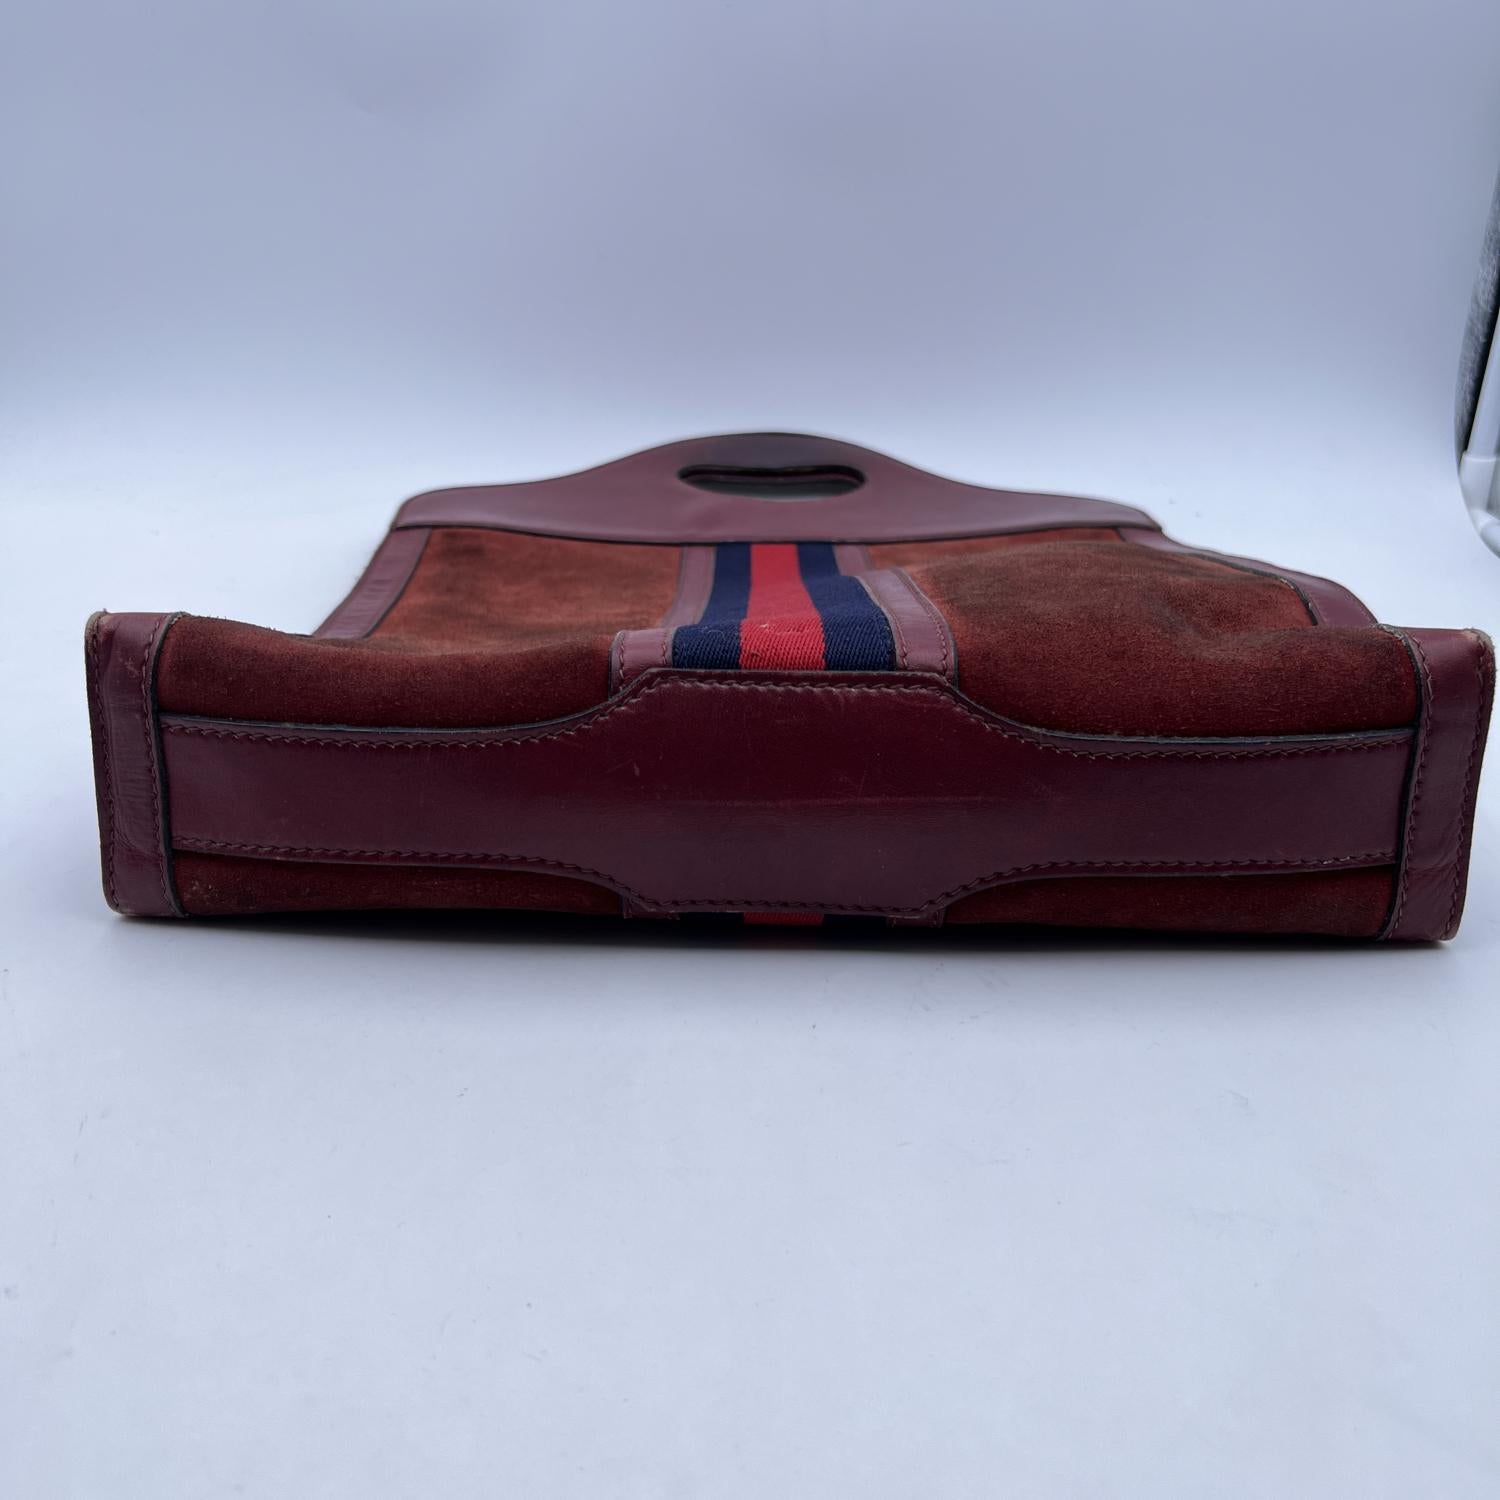 Beautiful Gucci tote made in burgundy suede with leather trim and handles. Blue/Red/Blue stripes on the front and on the back. Open top. Diamond fabric lining. 'Made in Italy by GUCCI' embossed inside


Details

MATERIAL: Suede

COLOR: